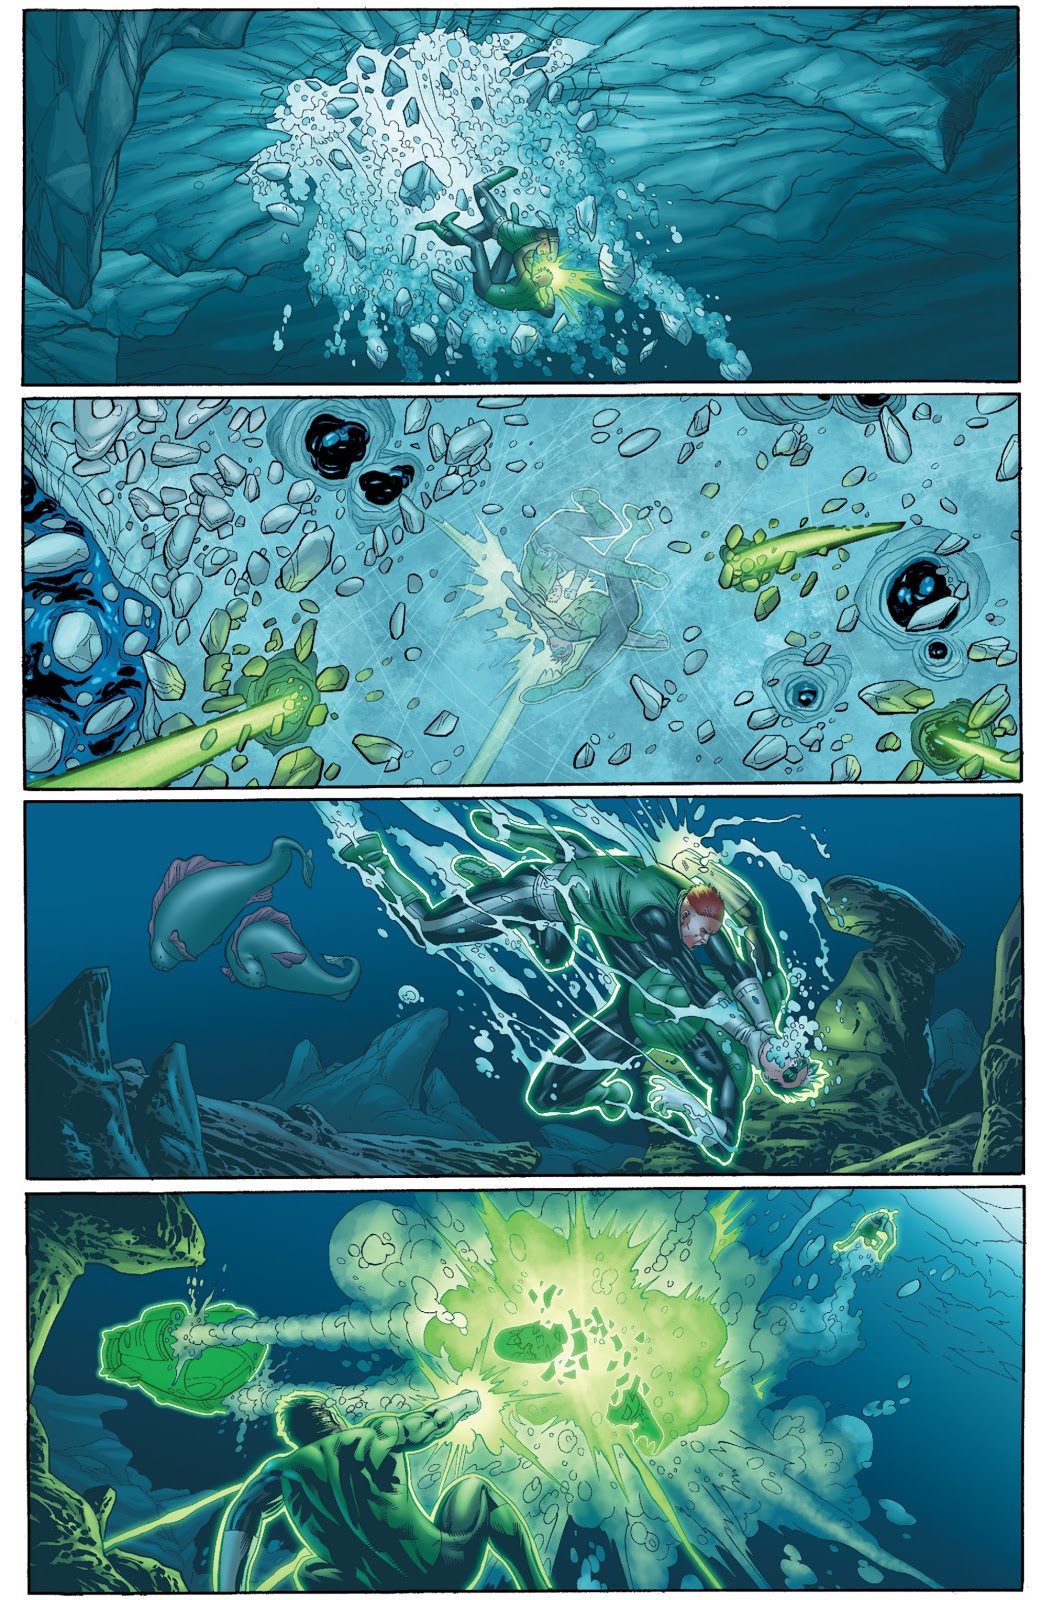 From - Emerald Warriors #8